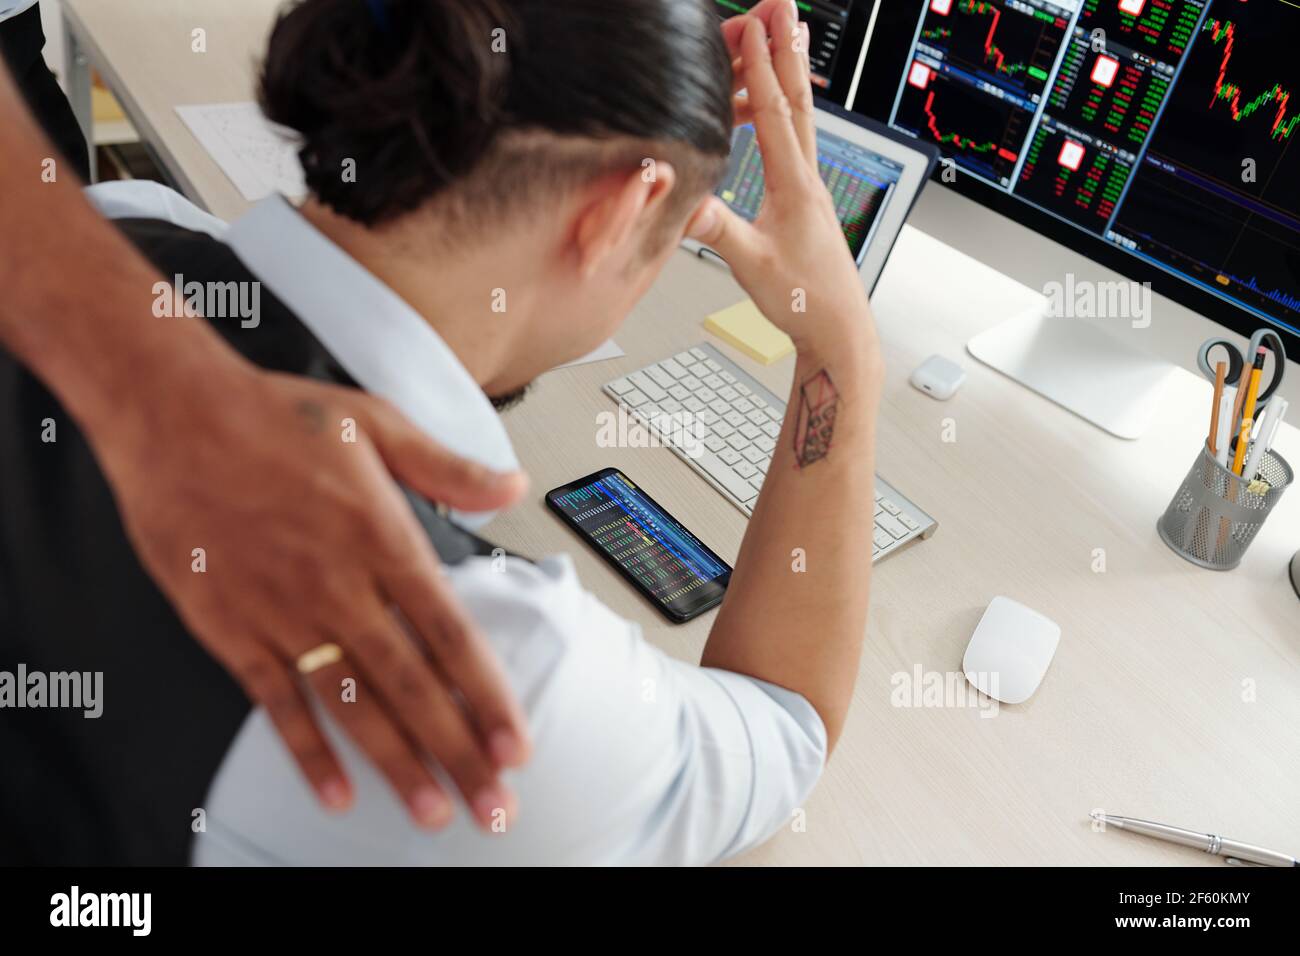 Trader supporting colleague monitoring stock market via application on smartphone Stock Photo